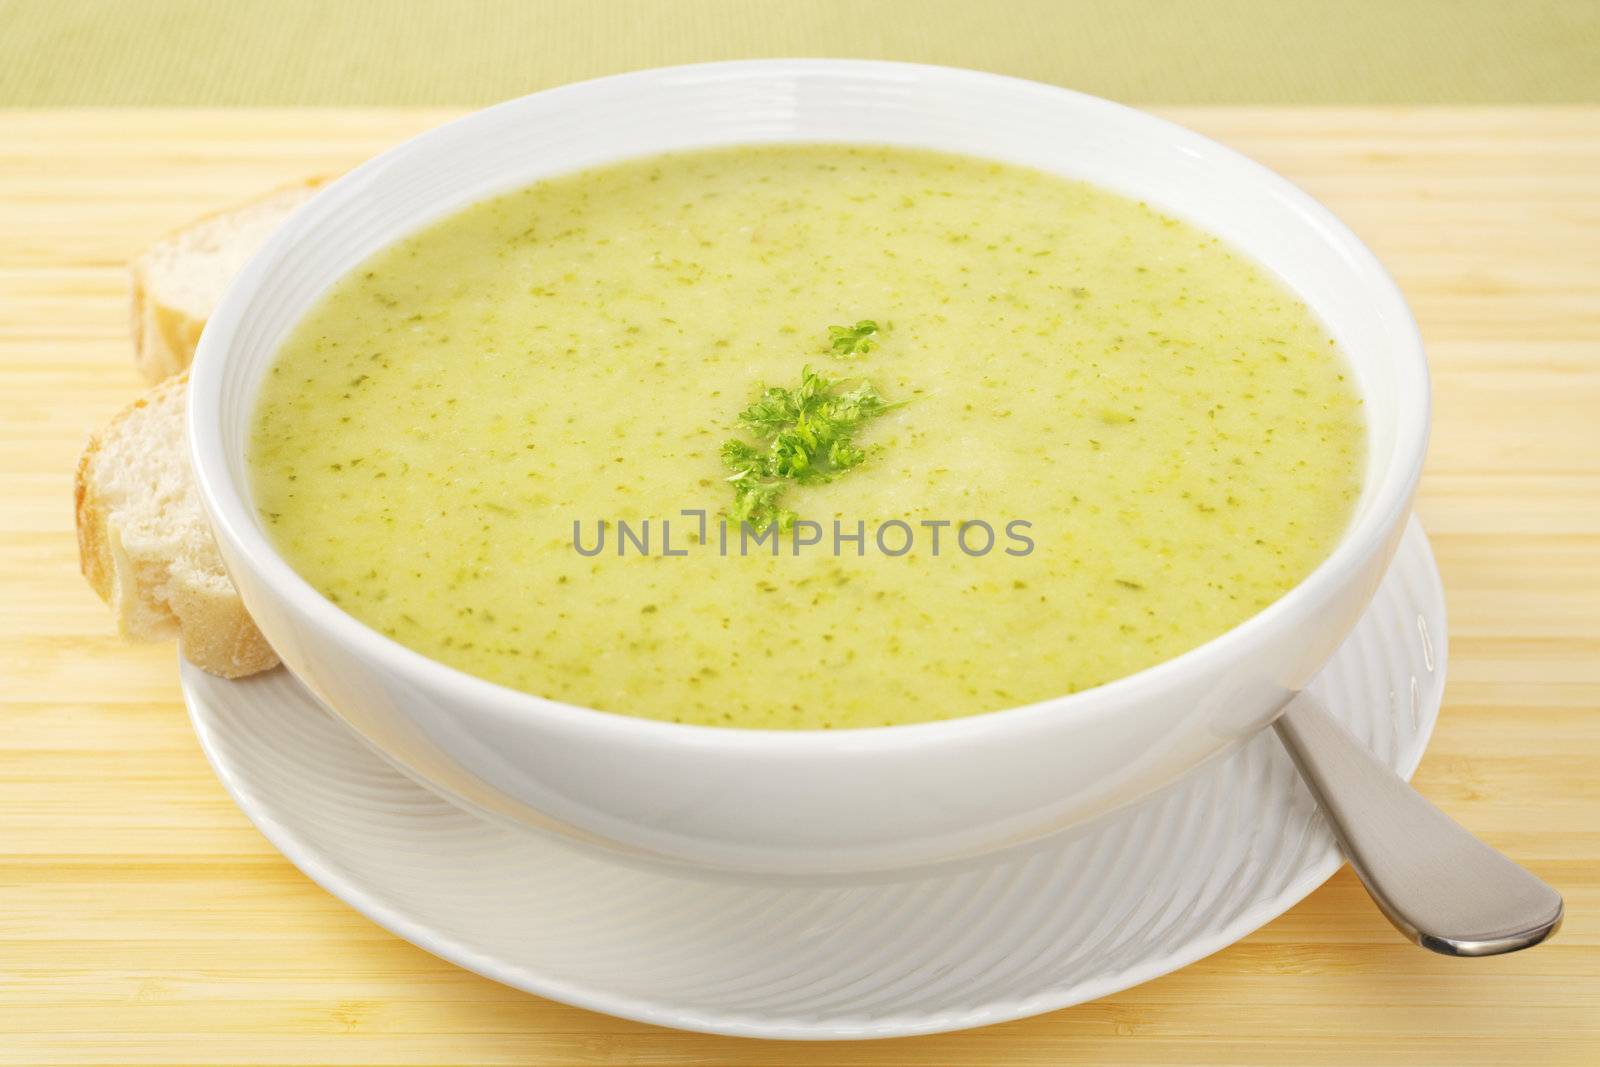 A pretty green soup made from courgettes and potato, garnished with parsley.